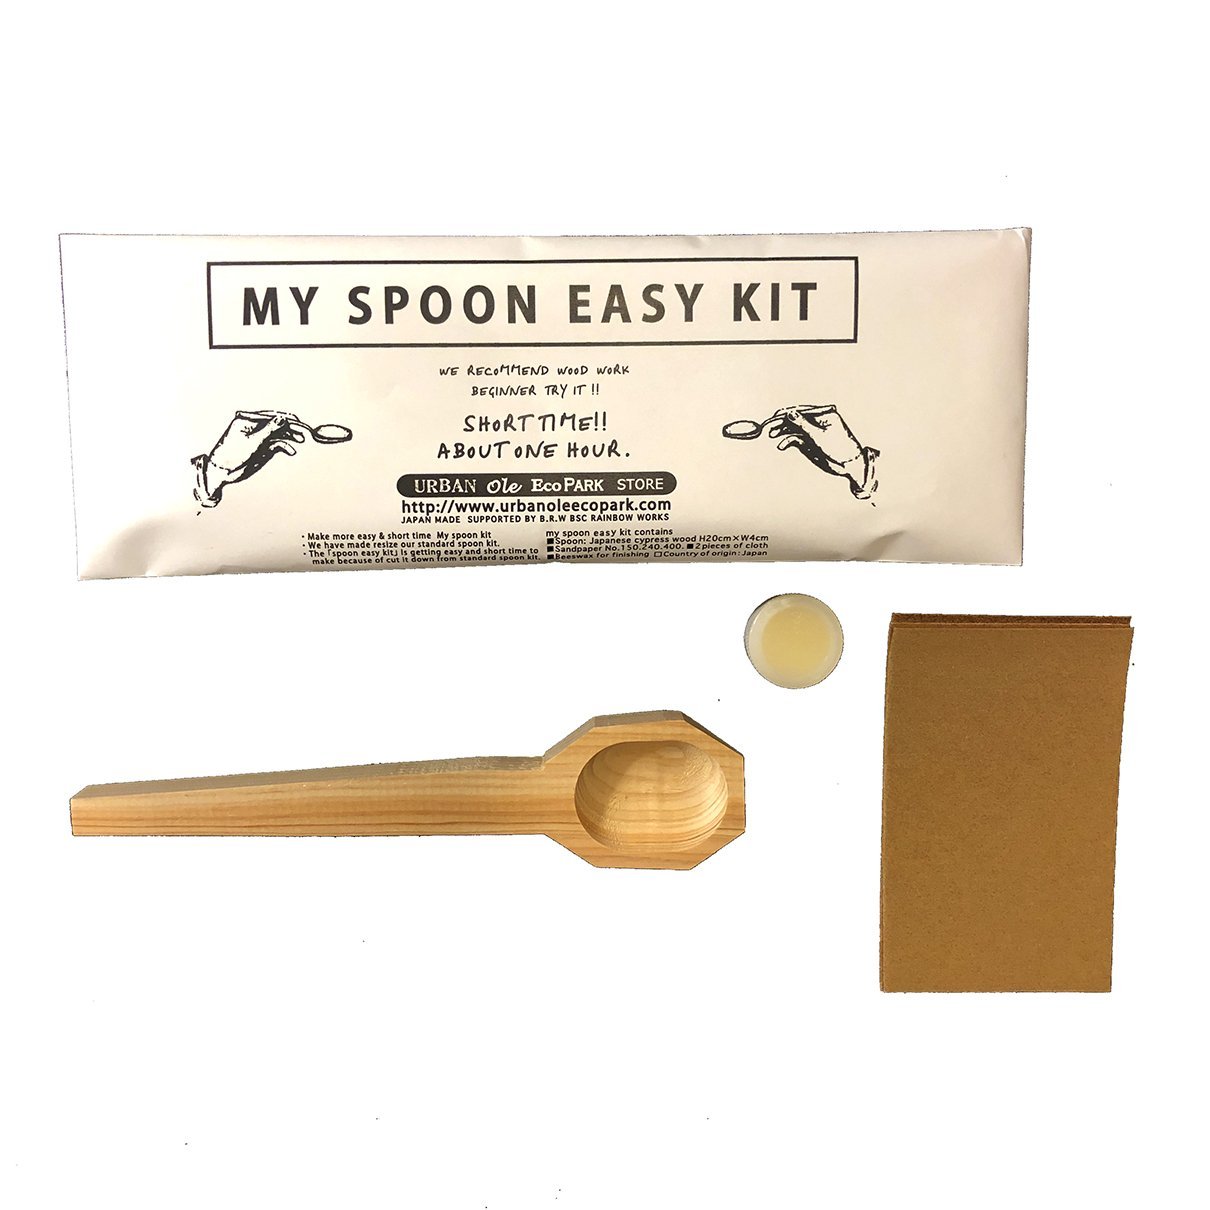 MY SPOON EASY KIT - LAB Collector Hong Kong